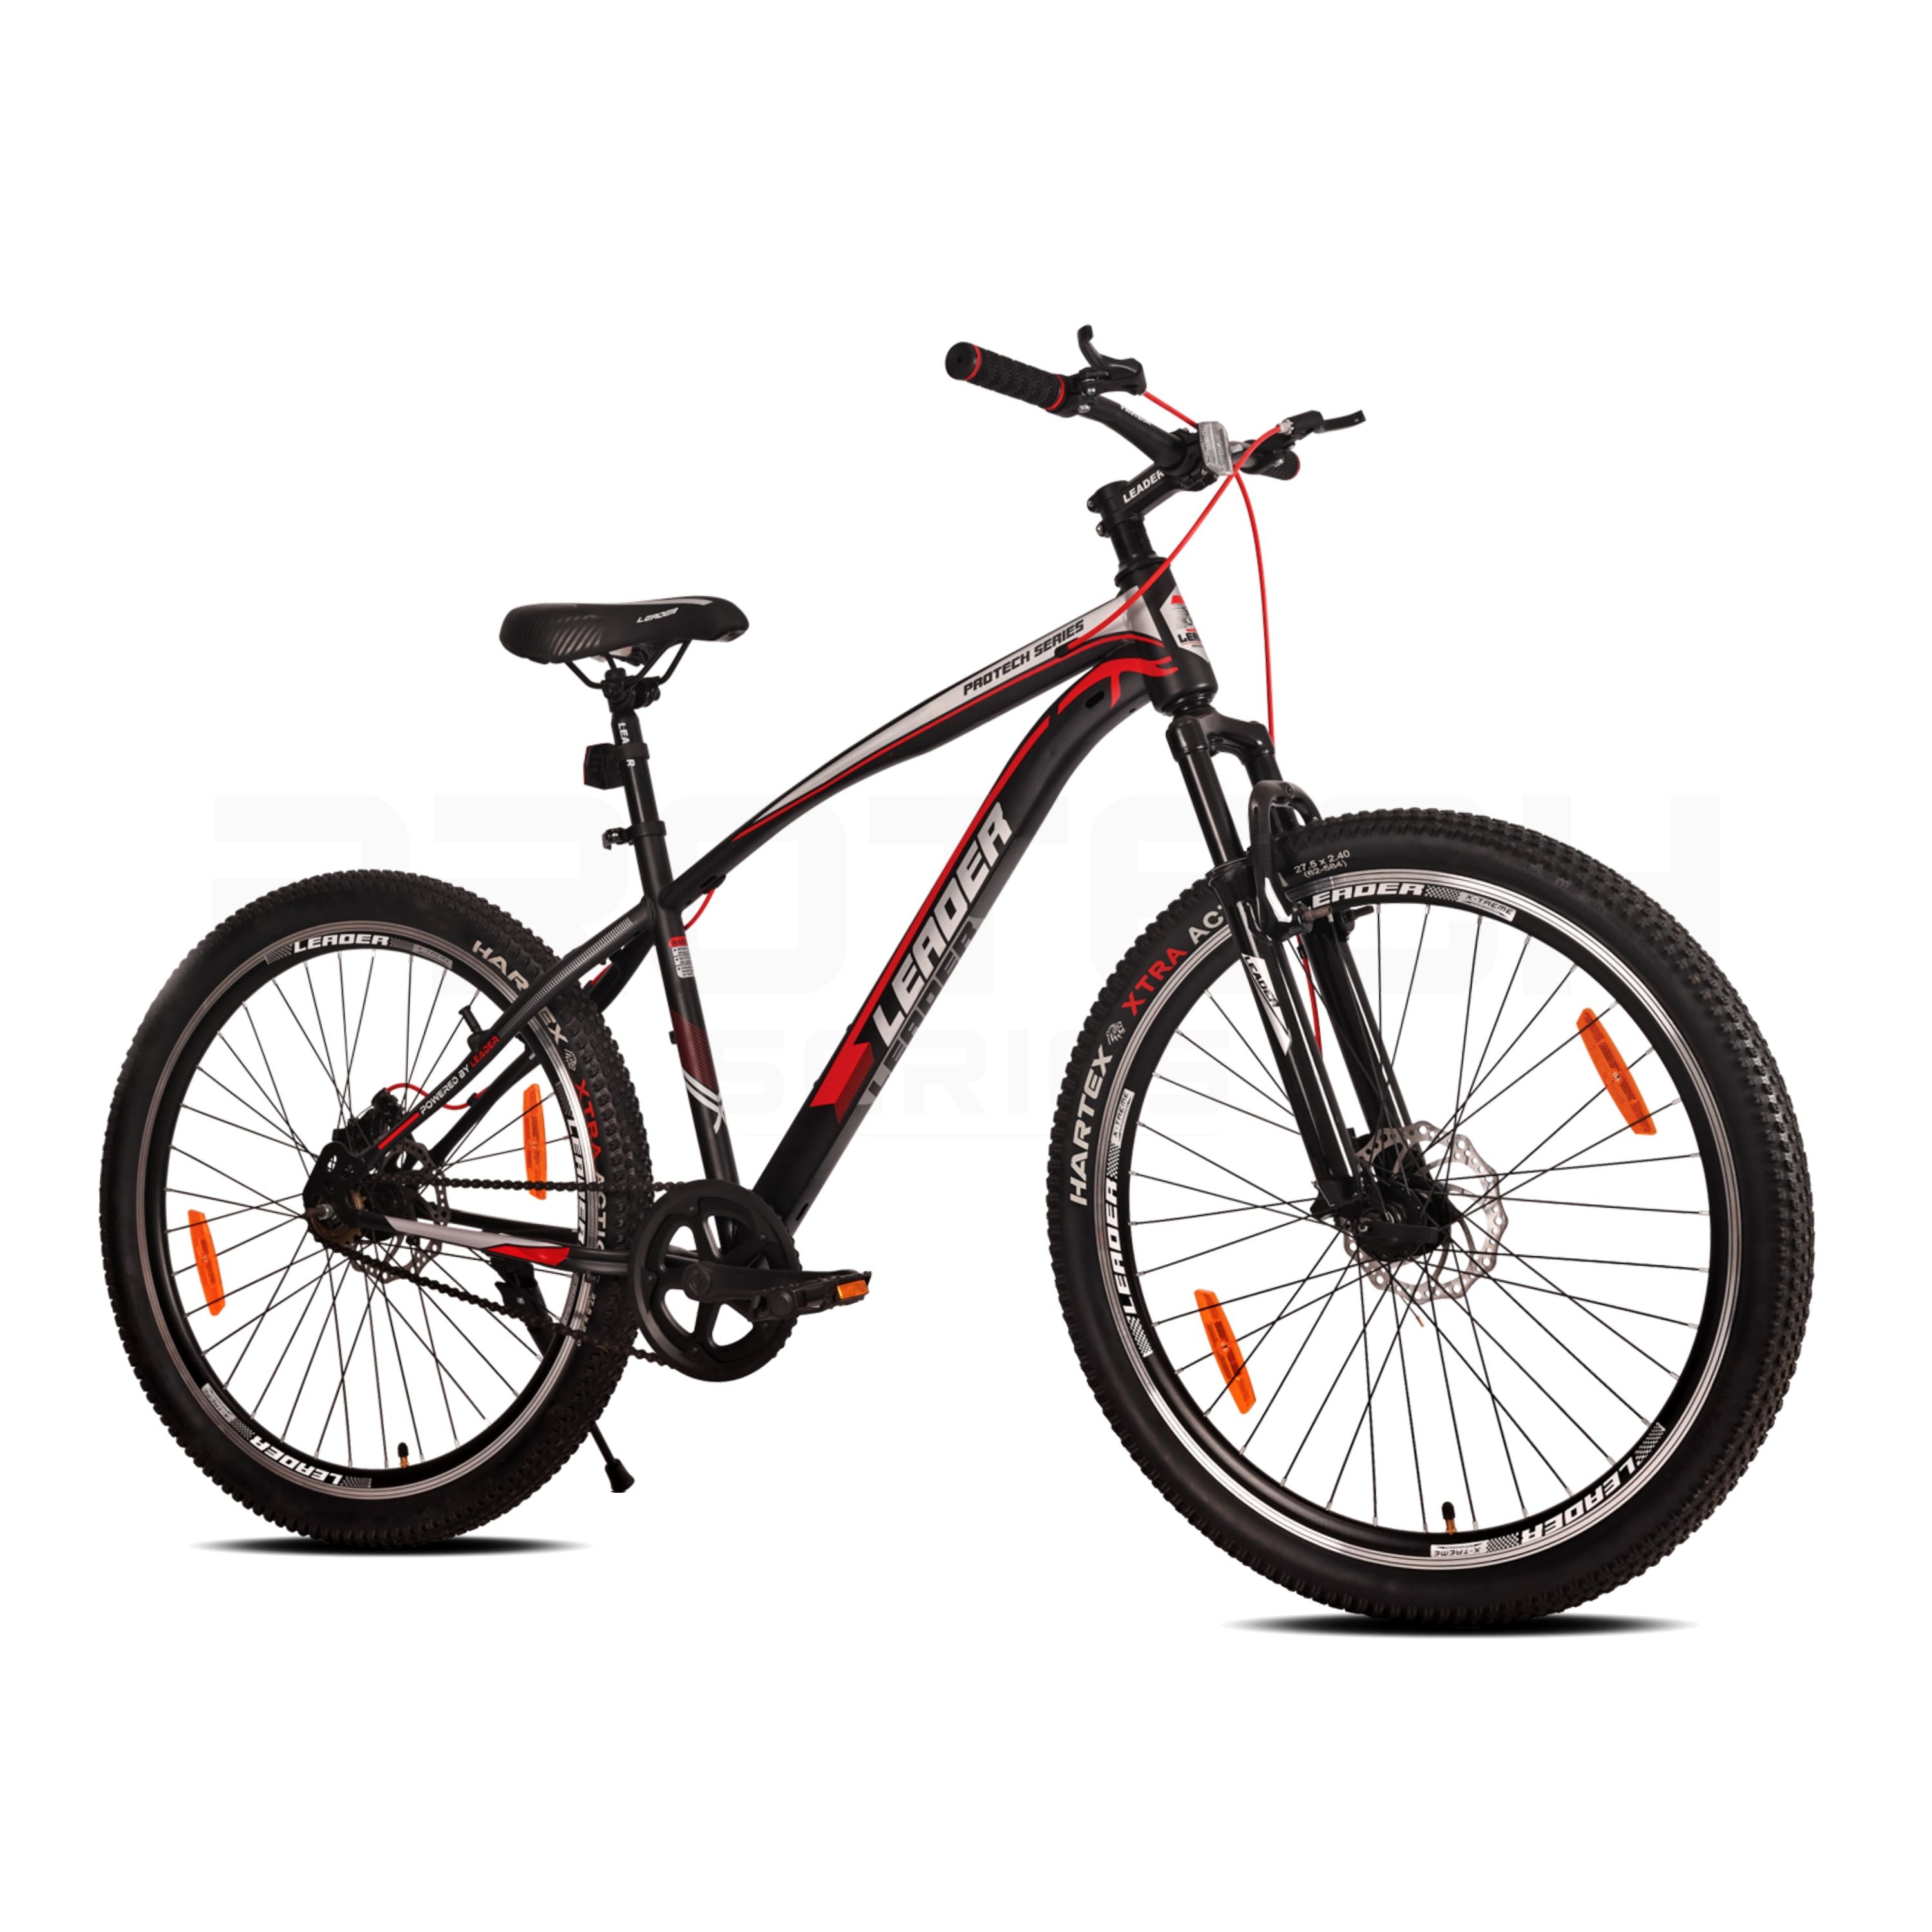 Brawny 27.5T with Front Suspension & Dual Disc Brake